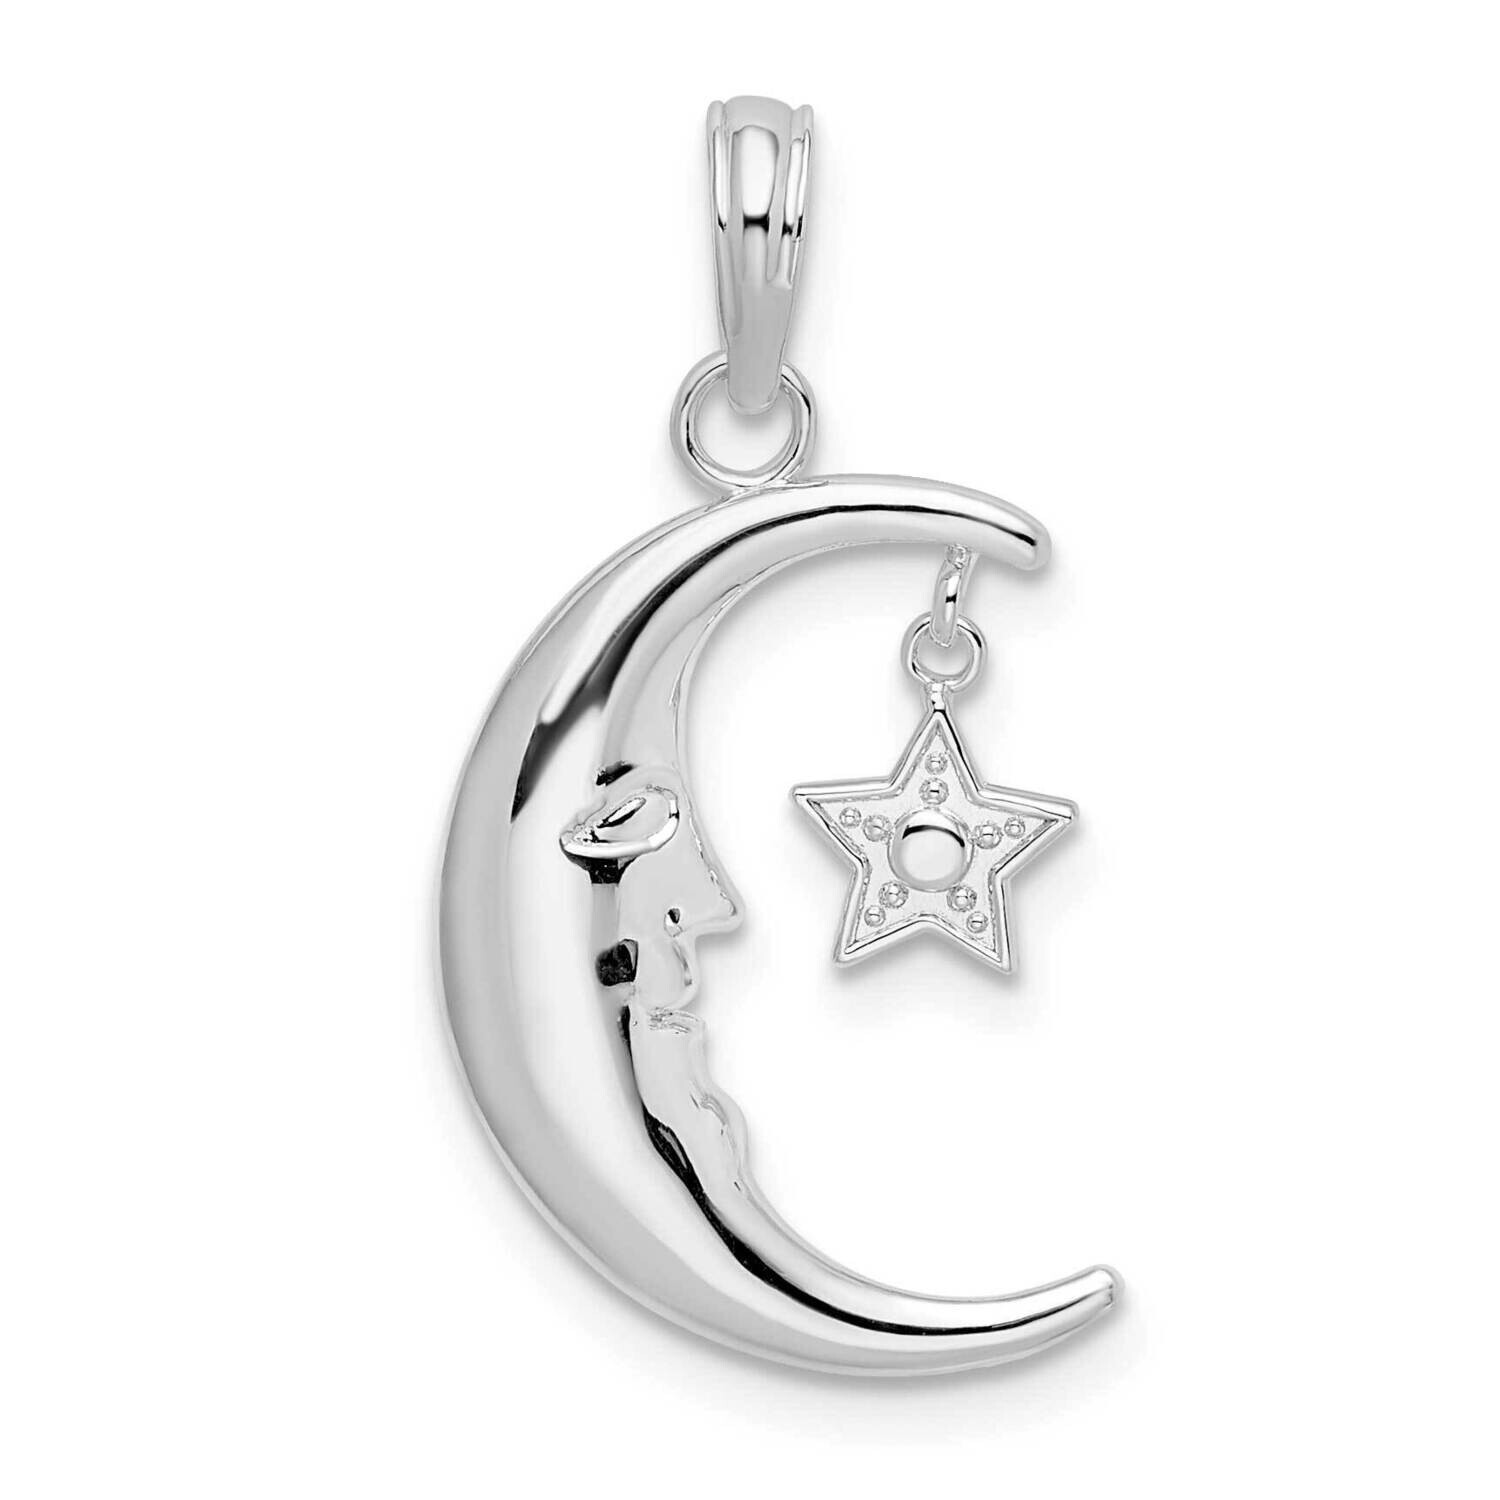 Moveable Polished Crescent Moon Star Pendant Sterling Silver QC10518